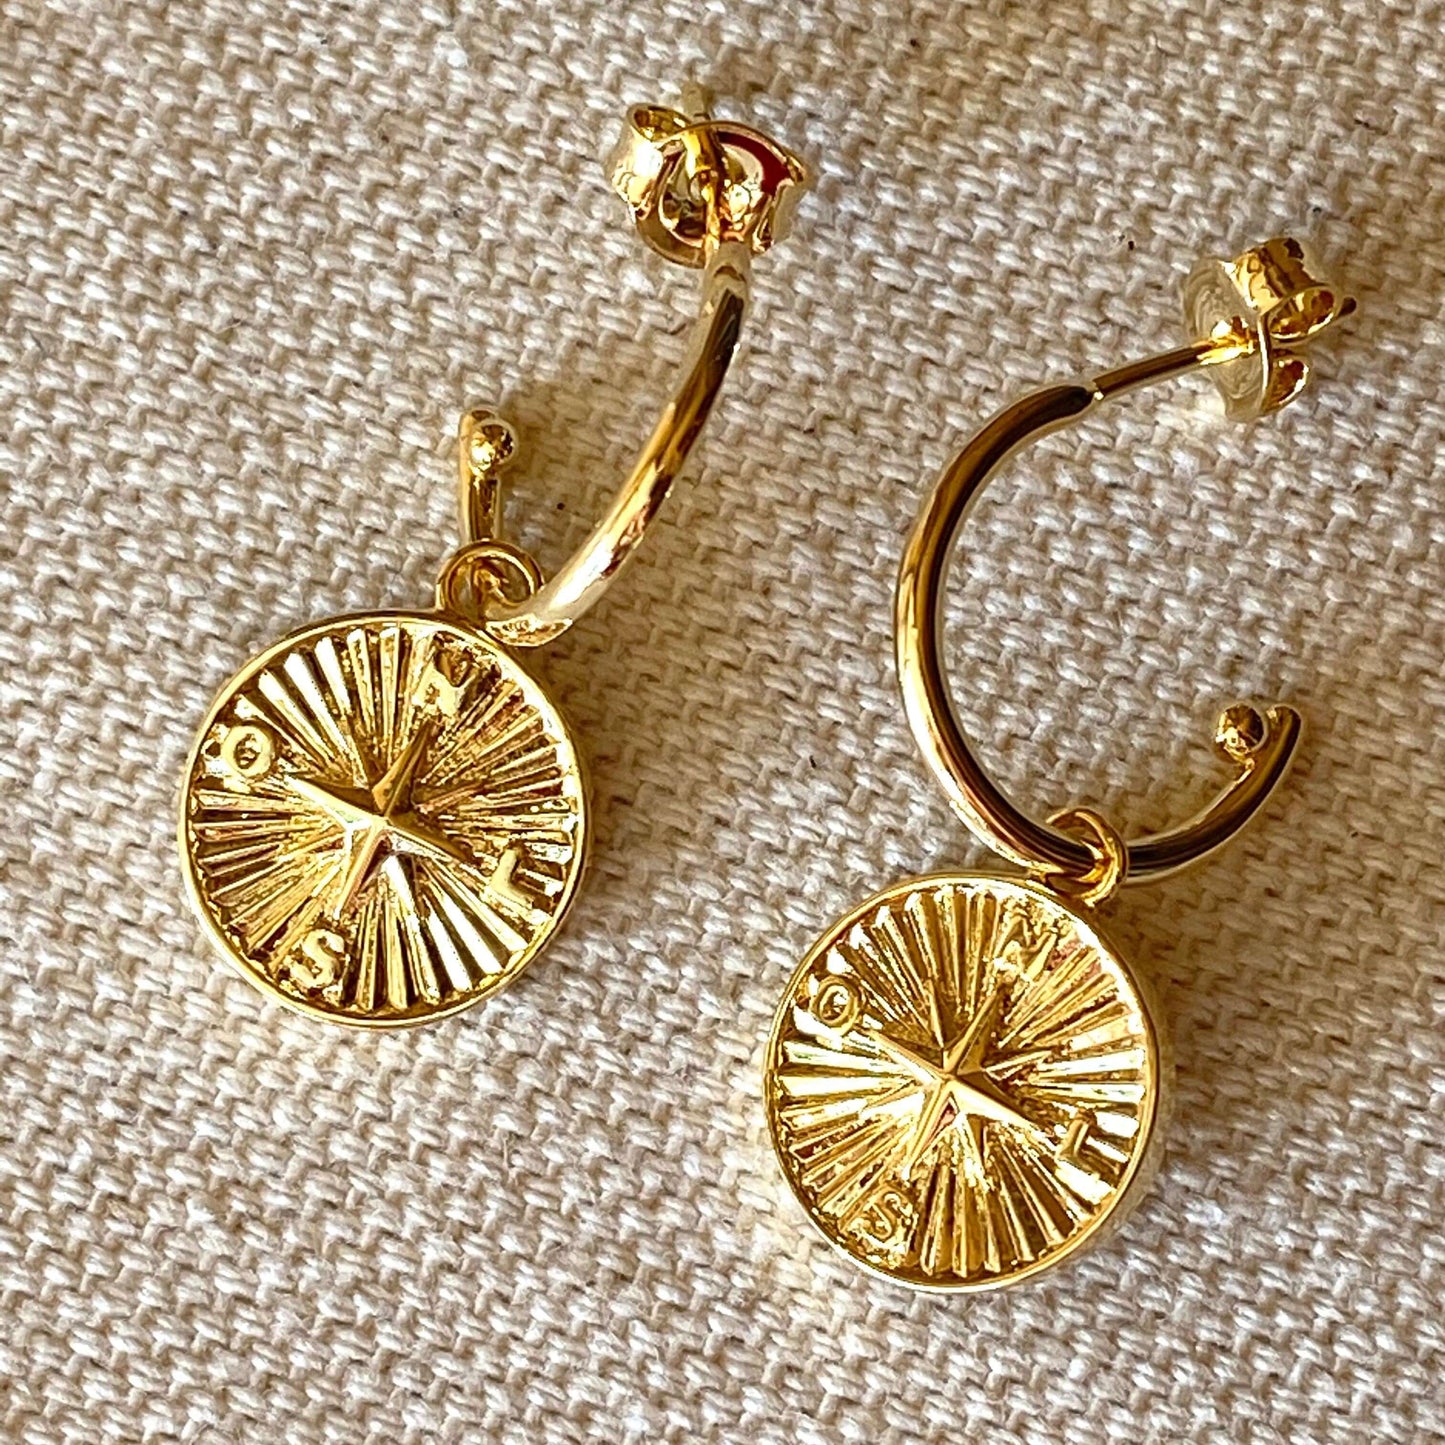 GoldFi 18k Gold Filled C Hoops With Dainty Compass Charm